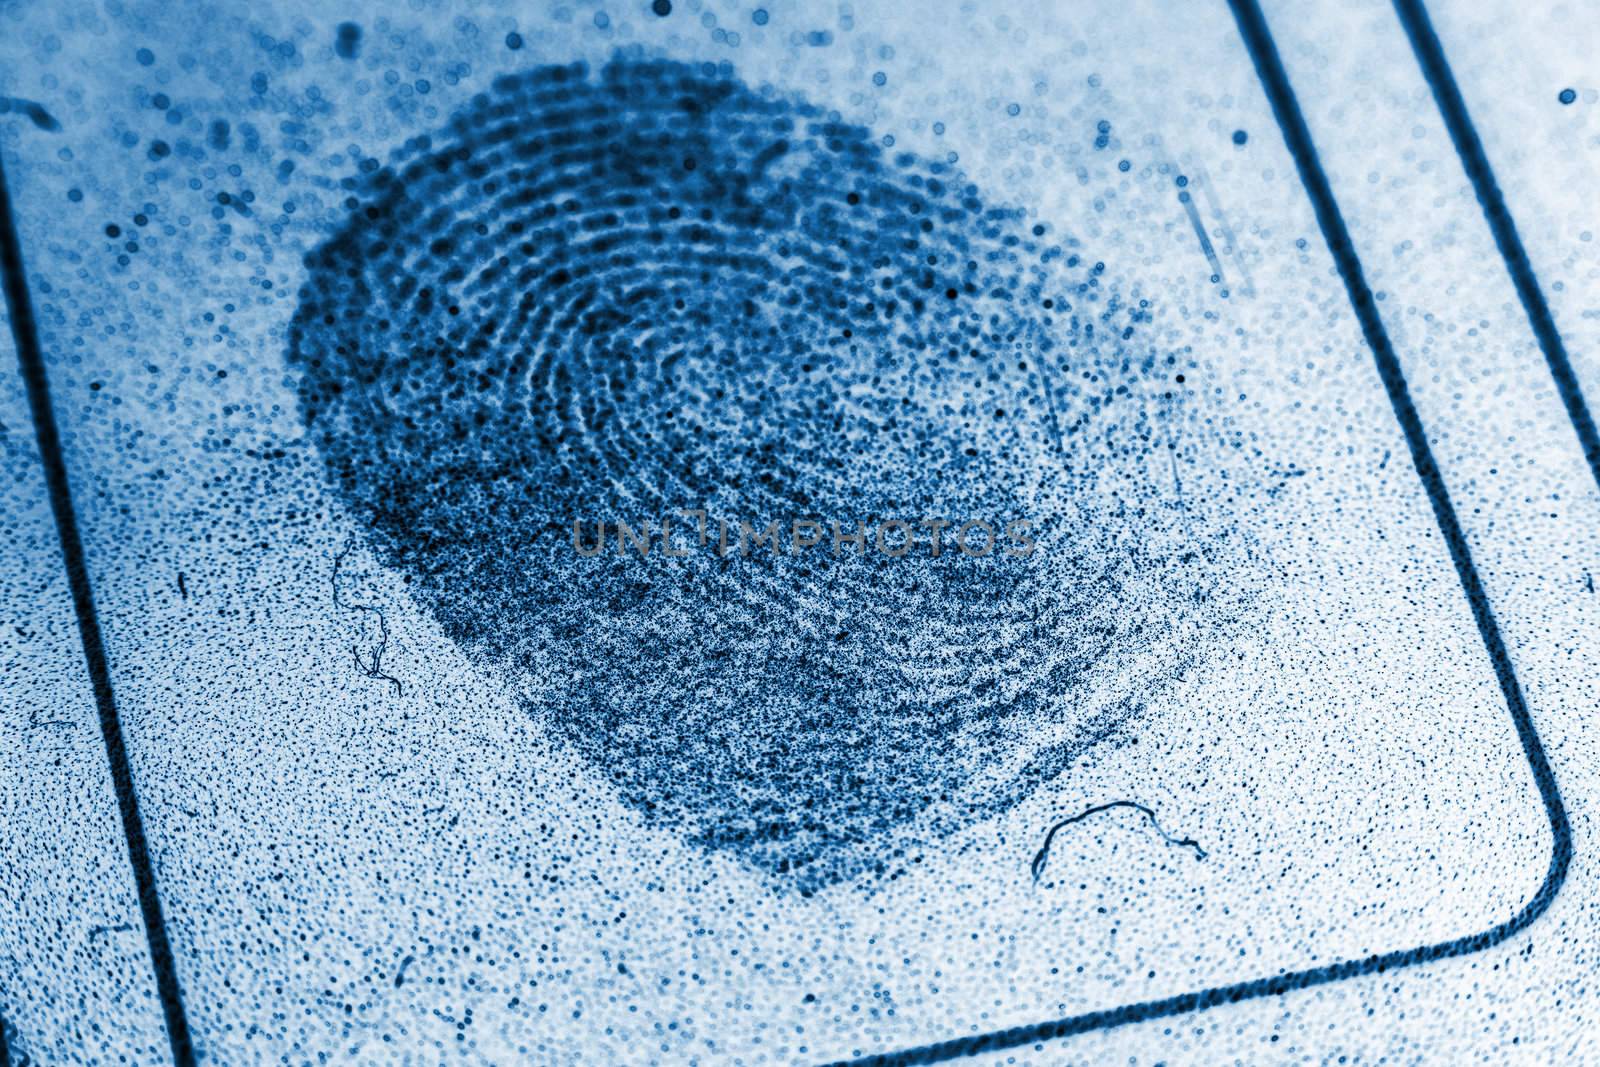 Concept image of a dusty fingerprint record